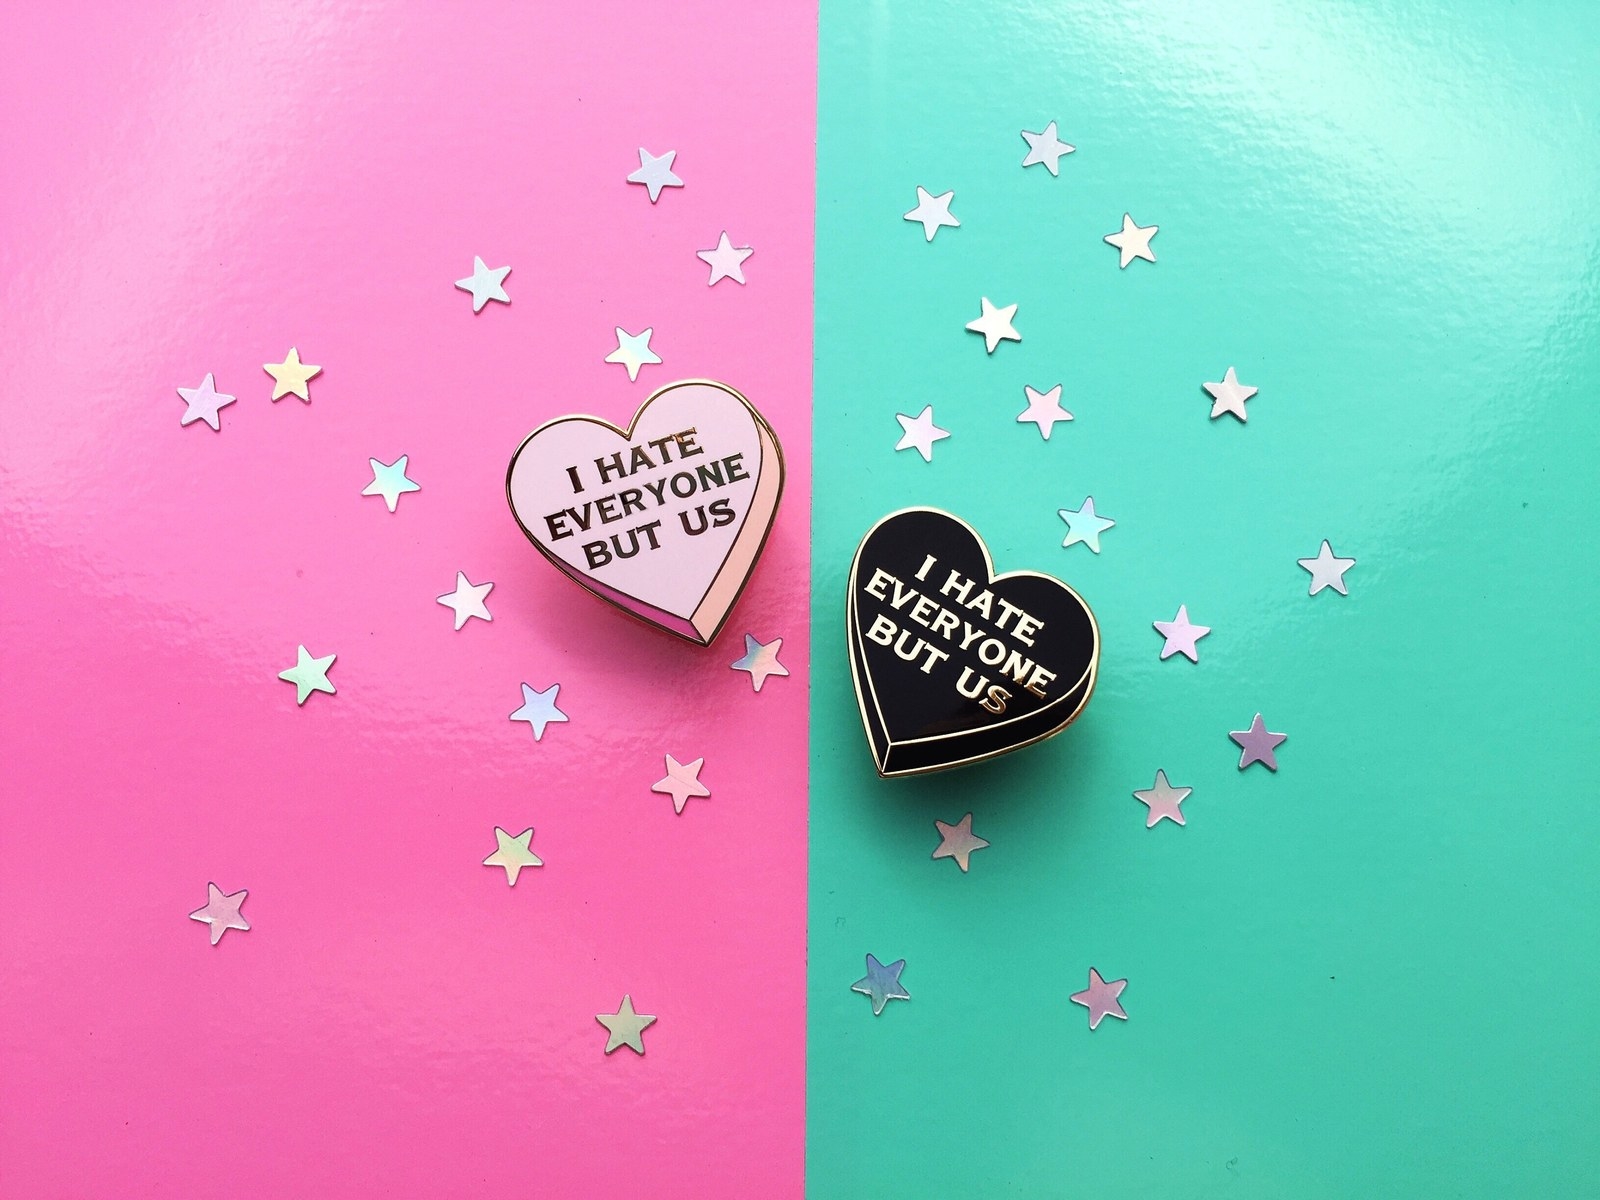 two heart shaped pins (one pink, one black) that say I hate everyone but us